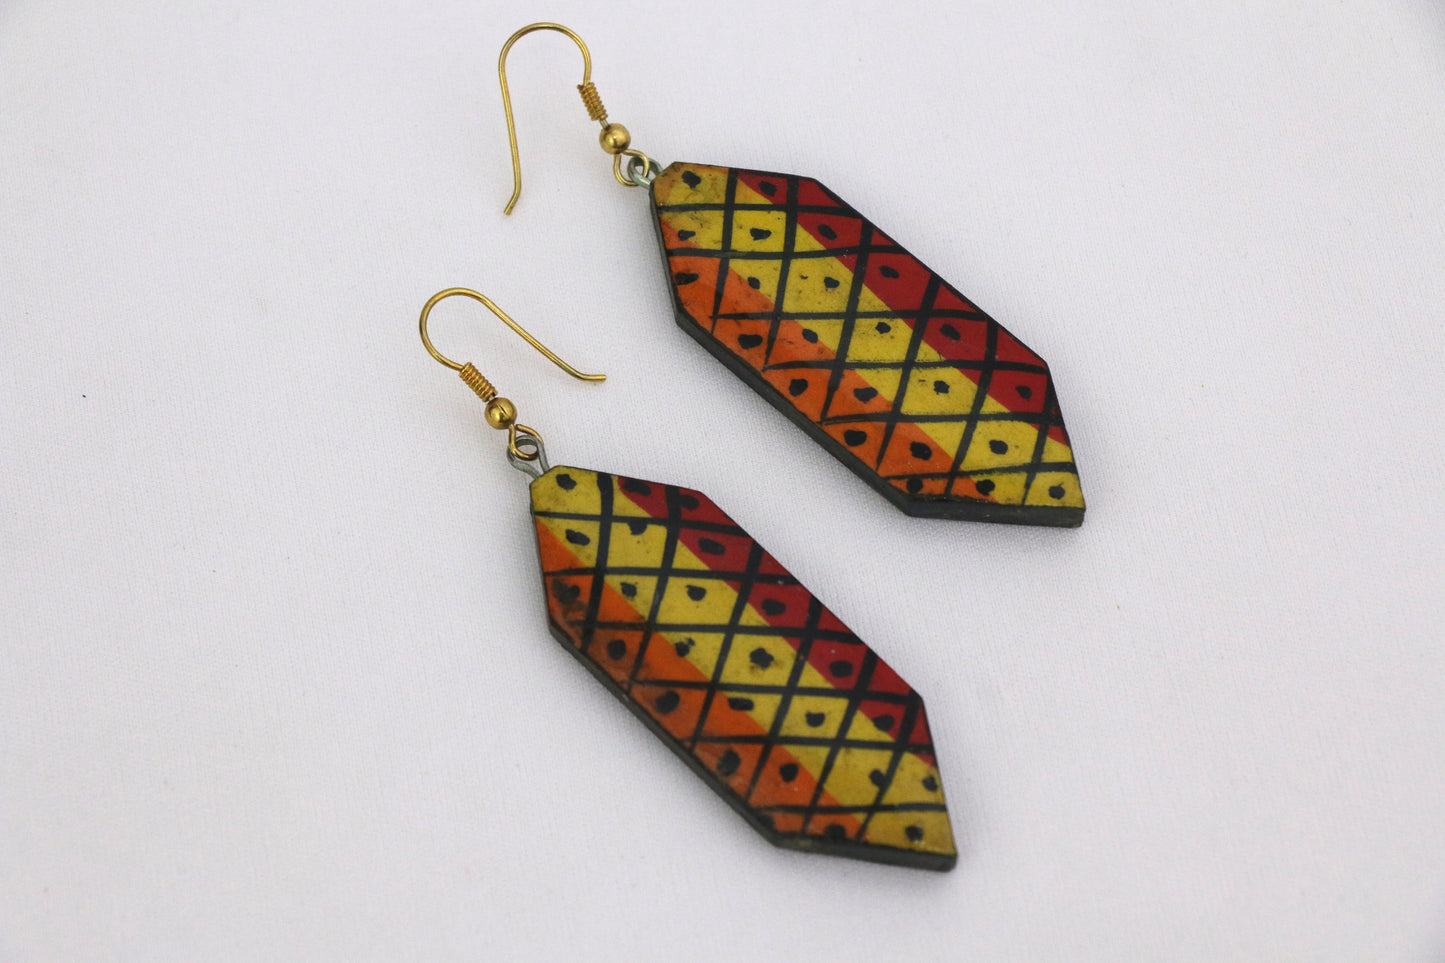 Channapatna wood craft –Locally crafted – Wooden Earrings – Alpine/Falu Red and Russet colored earring - For Kids / Adults -  P000158